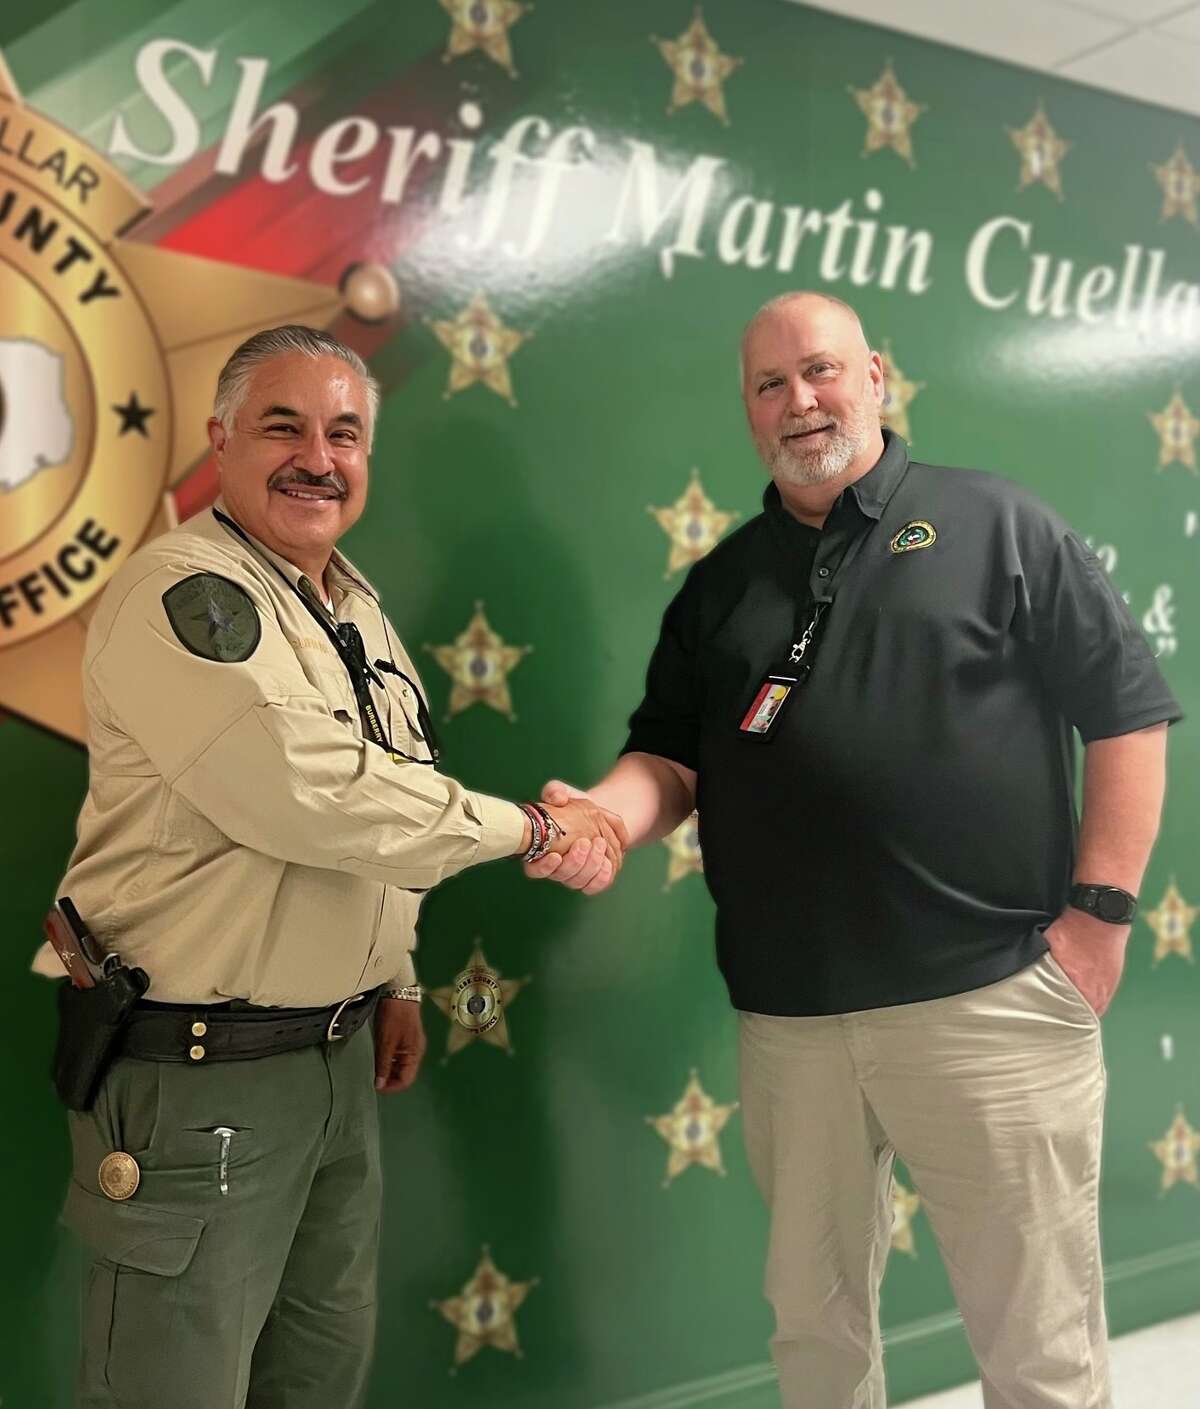 Sheriff Martin Cuellar is congratulated because the Webb County Jail passed its inspection.